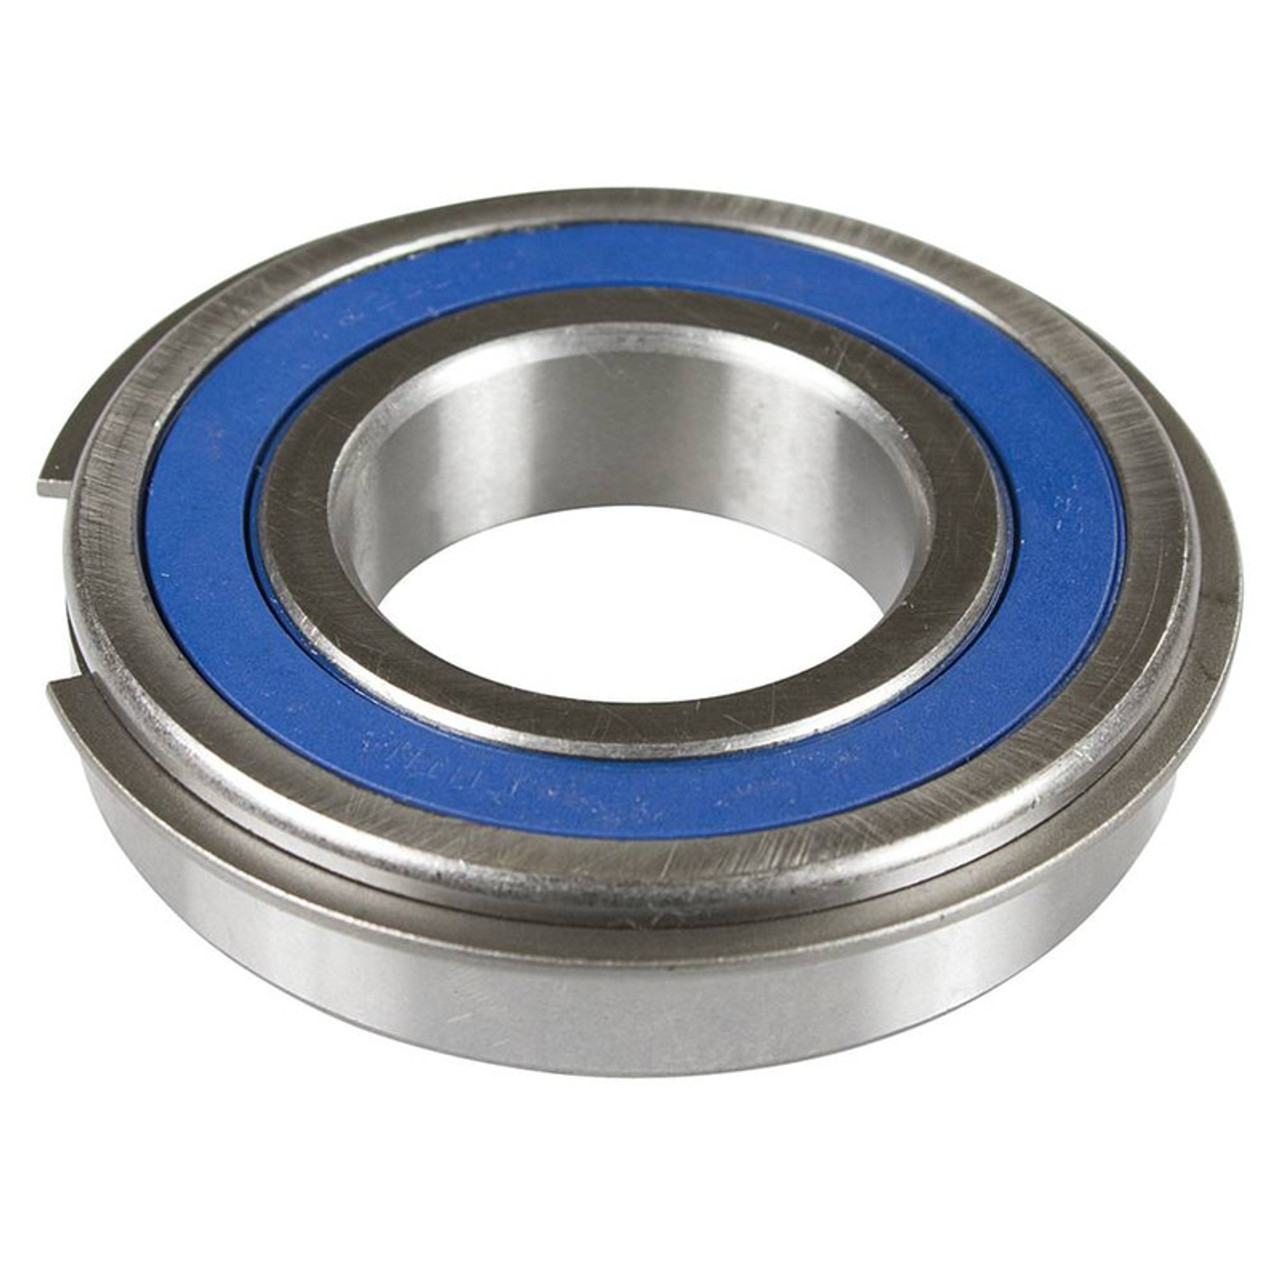 Clutch Bearing for Gravely 018042 05420900 62082RSNR 6208-2RSNR 800 series reverse actions clutch bearing for 4 wheel tractor